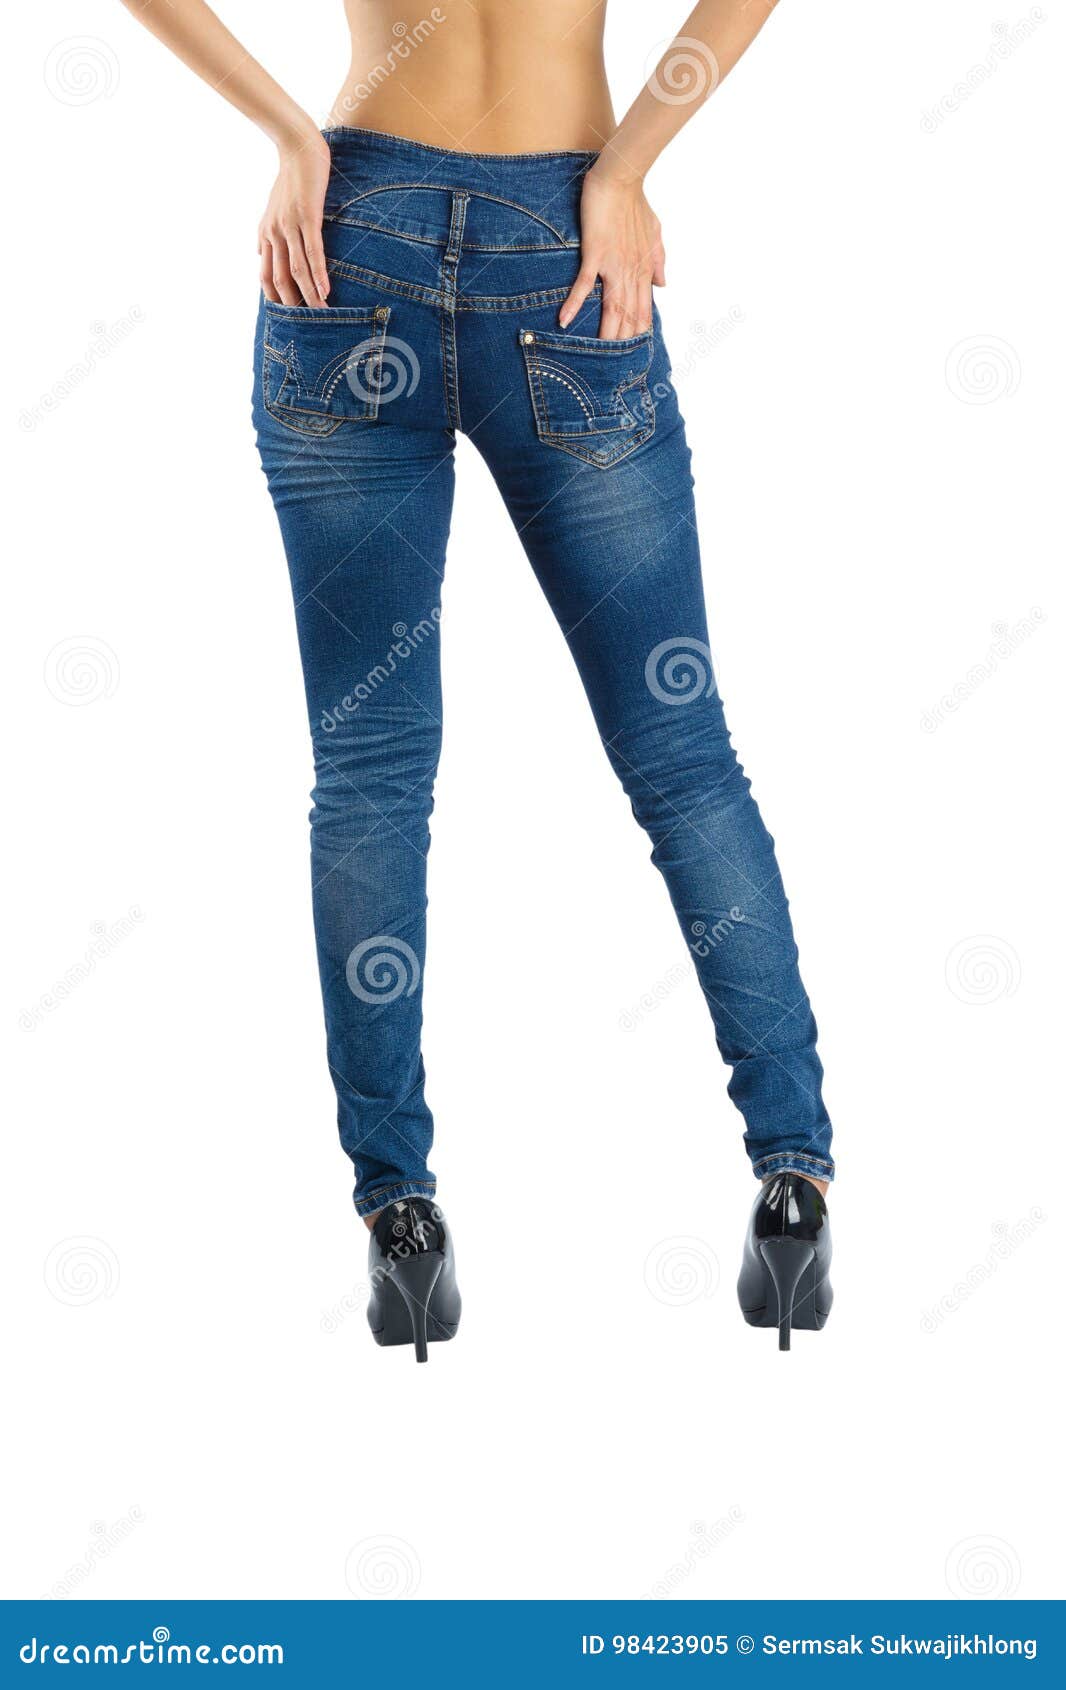 Woman blue jeans back view stock image. Image of view - 98423905